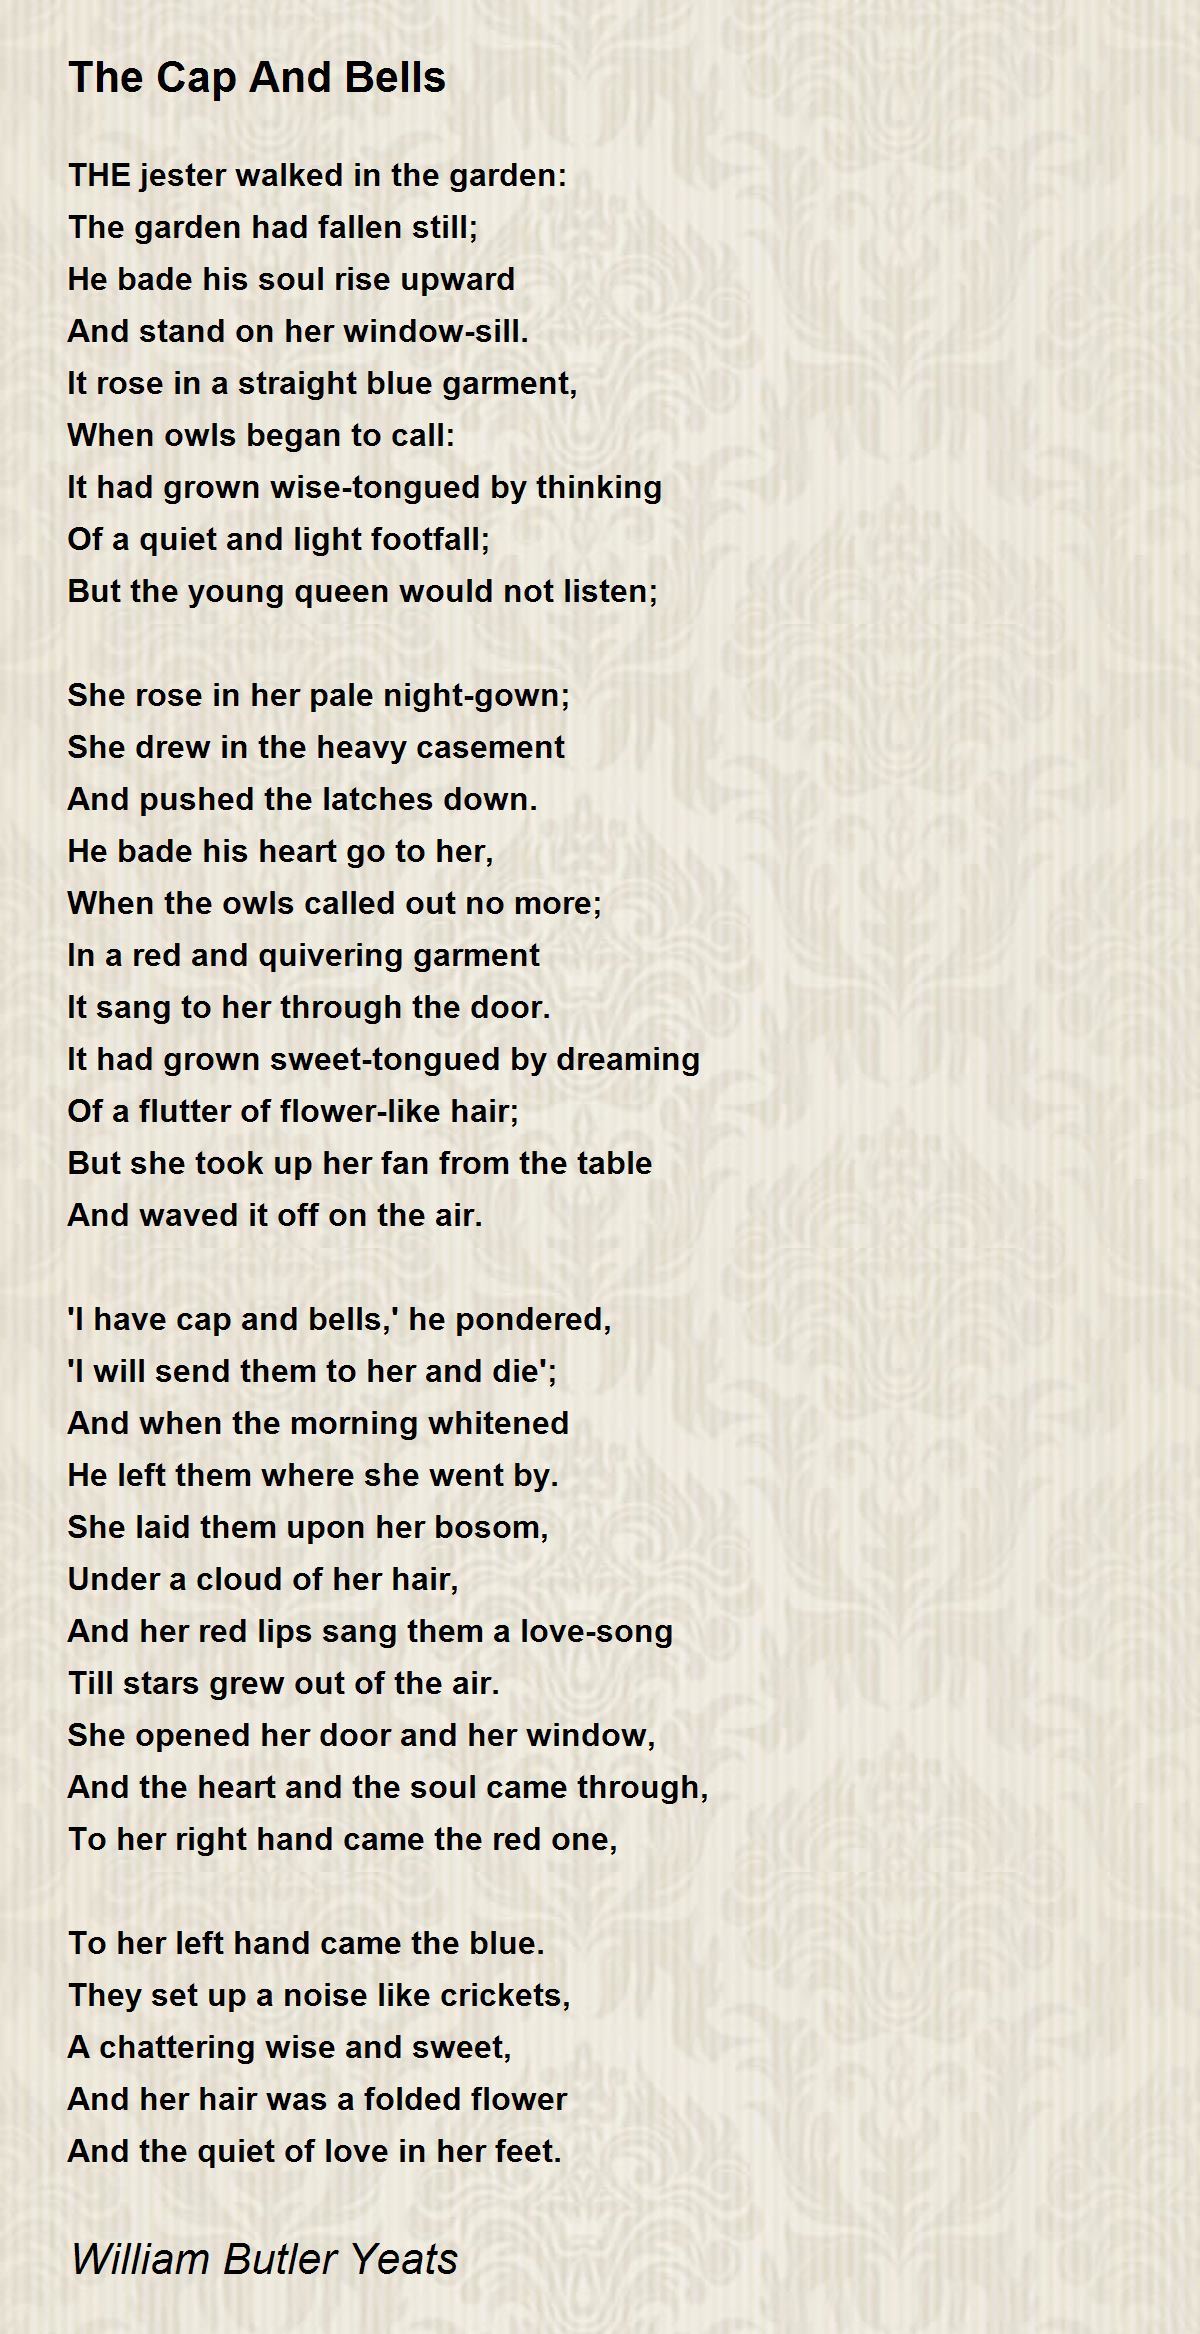 The Cap And Bells by William Butler Yeats - The Cap And Bells Poem